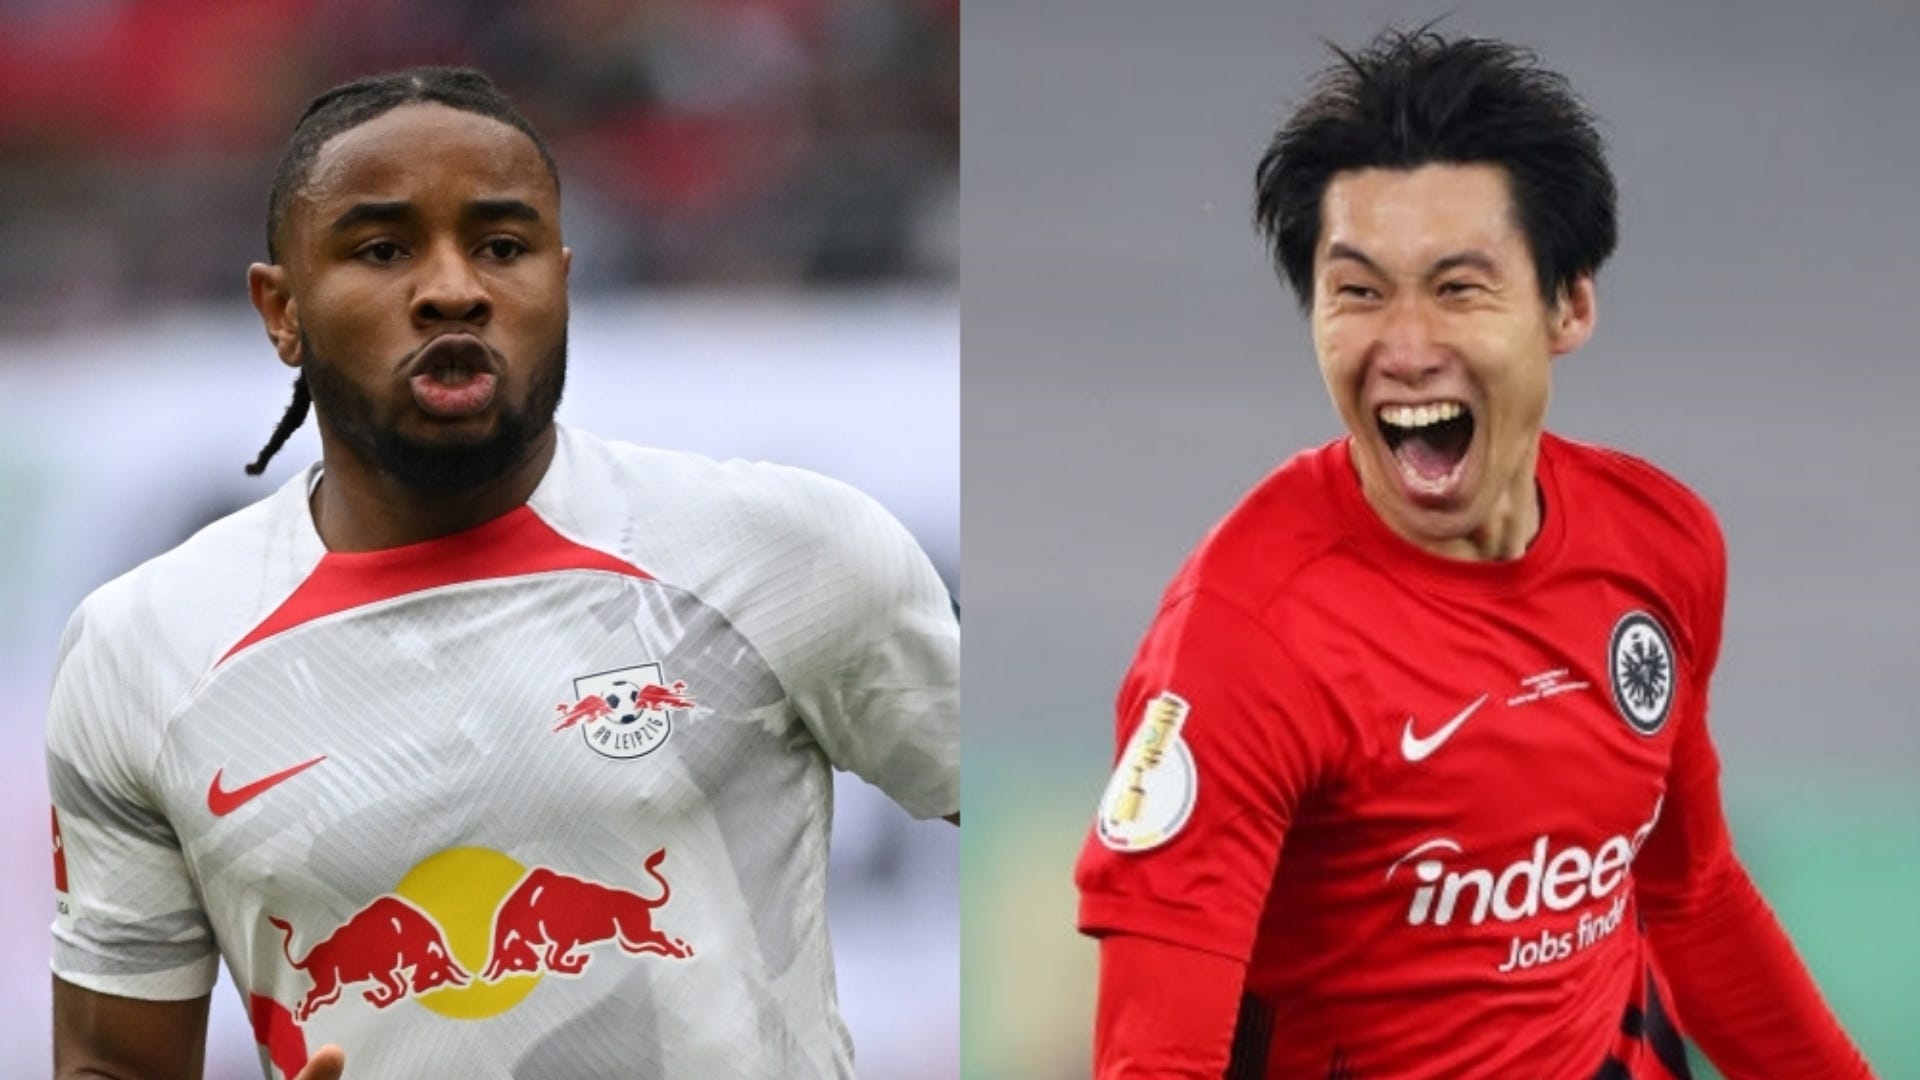 RB Leipzig vs Eintracht Frankfurt Live stream, TV channel, kick-off time and where to watch DFB Pokal final Goal US